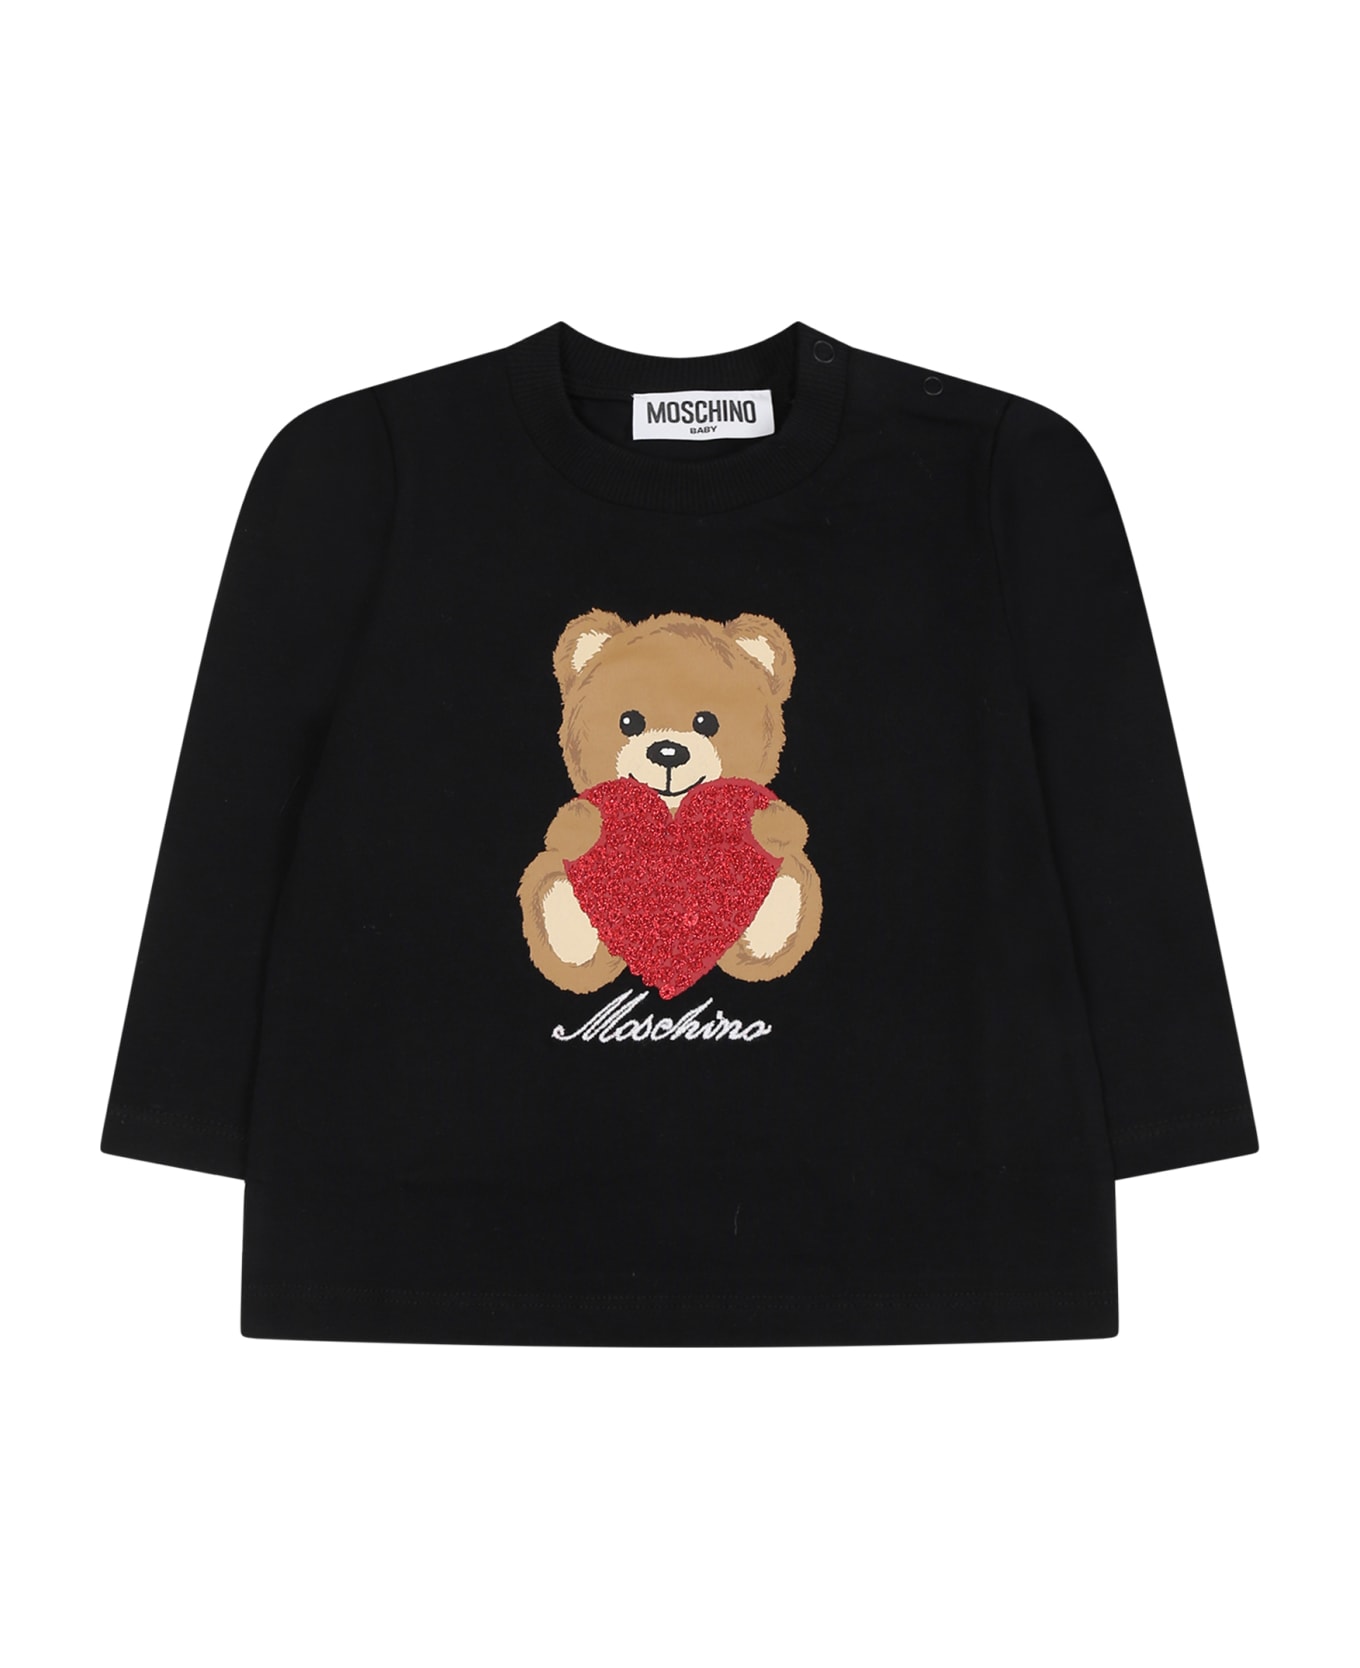 Moschino Black T-shirt For Baby Girl With Teddy Bear And Hearts - Black